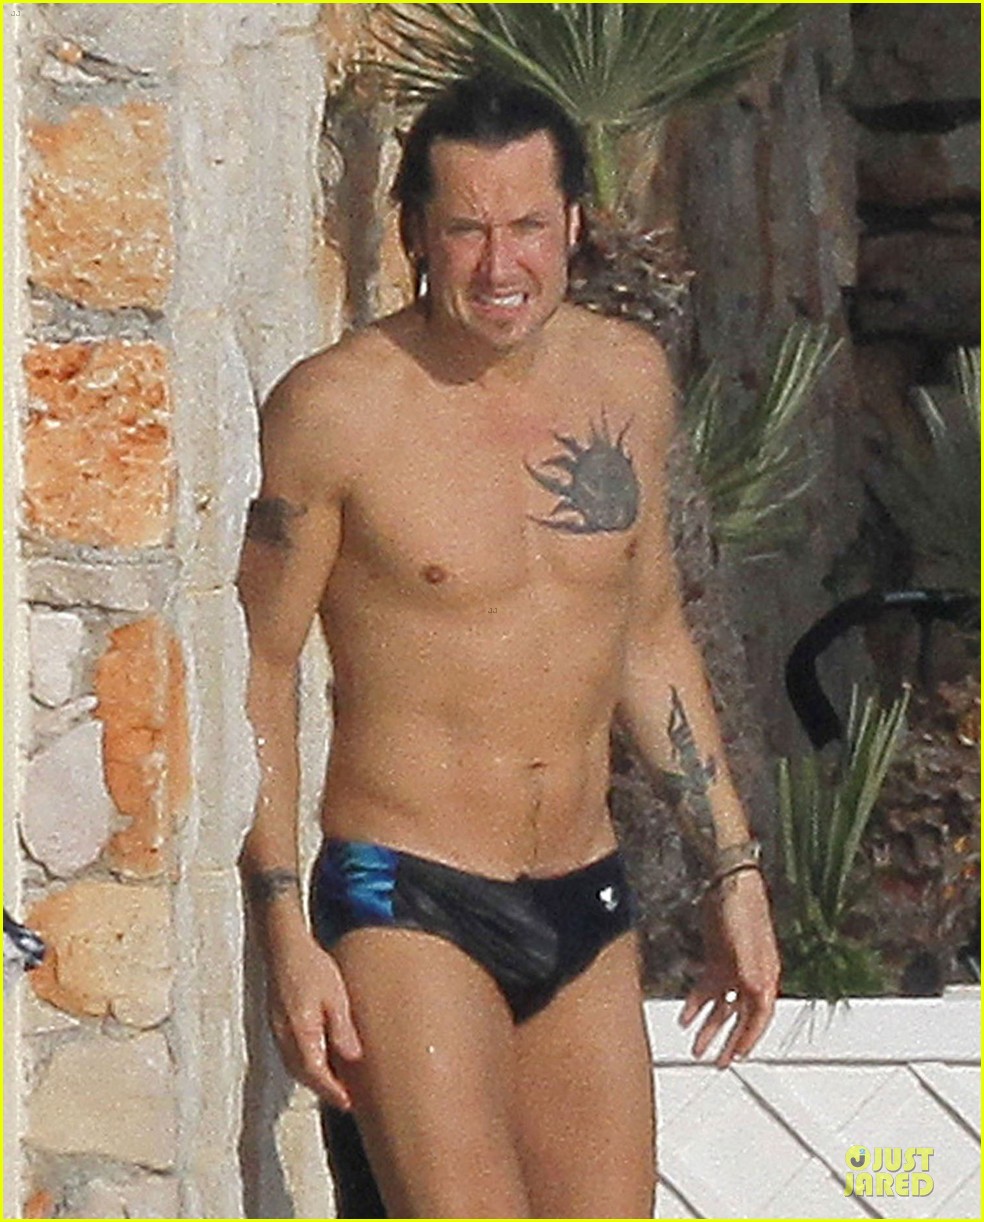 Keith Urban shows off his shirtless toned body in a speedo while swimming a...